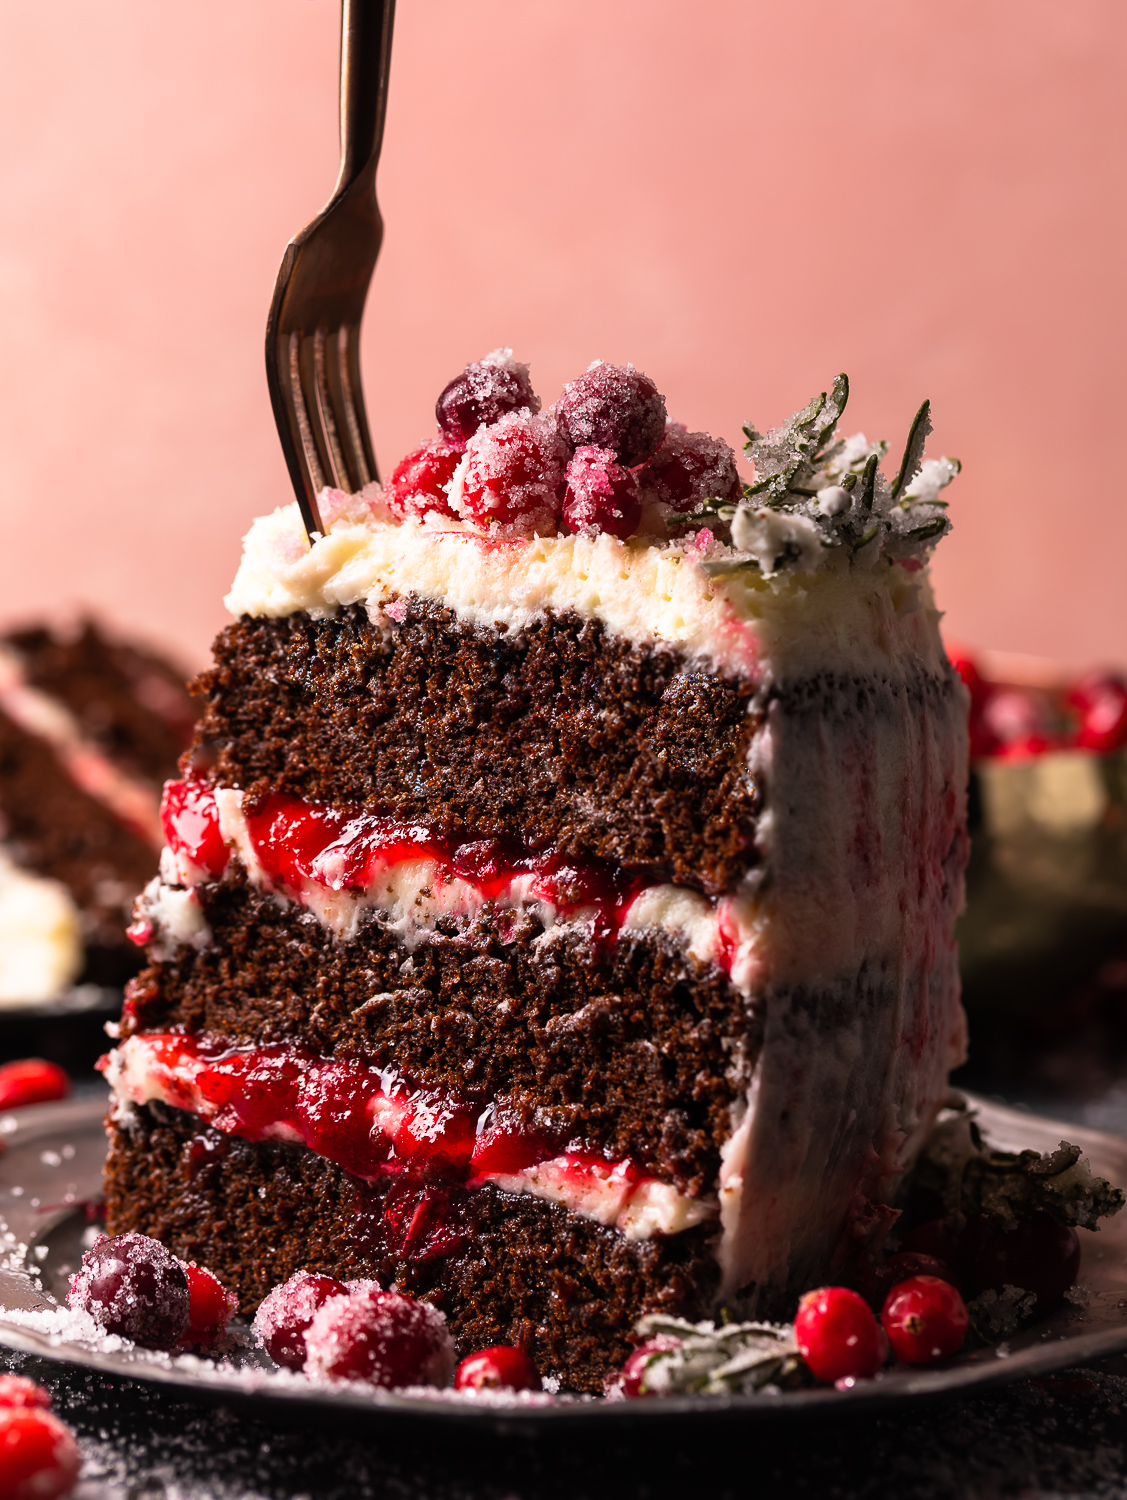 Featuring three layers of chocolate espresso cake, creamy mascarpone buttercream frosting, and a sweet cranberry filling, this Chocolate Cranberry Christmas Cake is a total showstopper! The perfect holiday dessert to wow your guests this year!